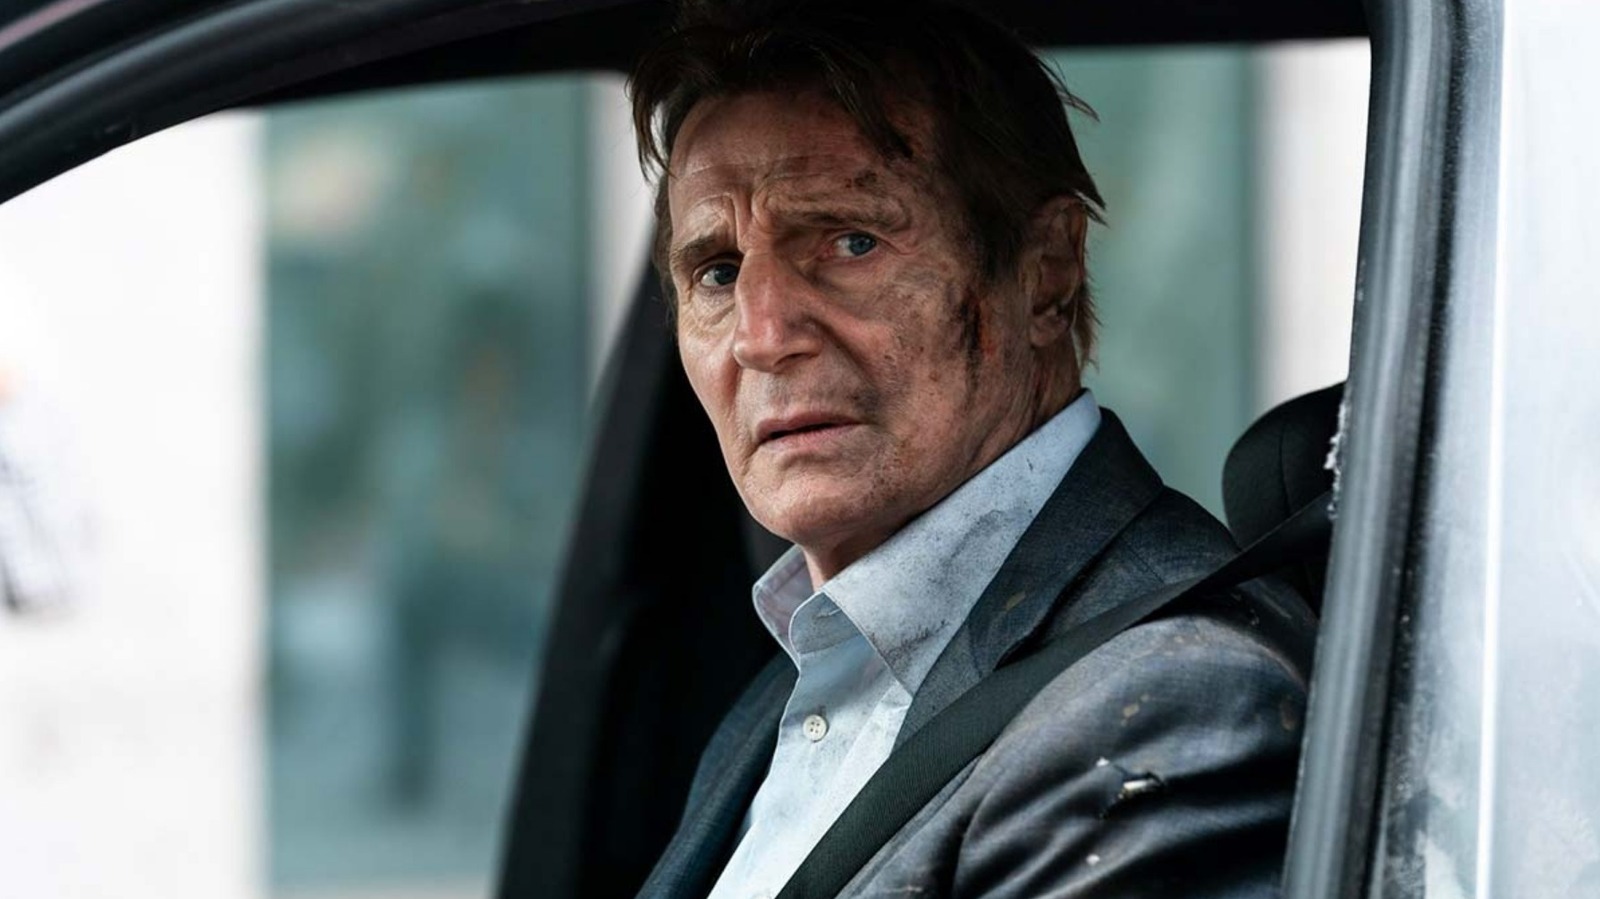 Retribution Trailer Liam Neeson Can't Stop Driving Or His Family Will